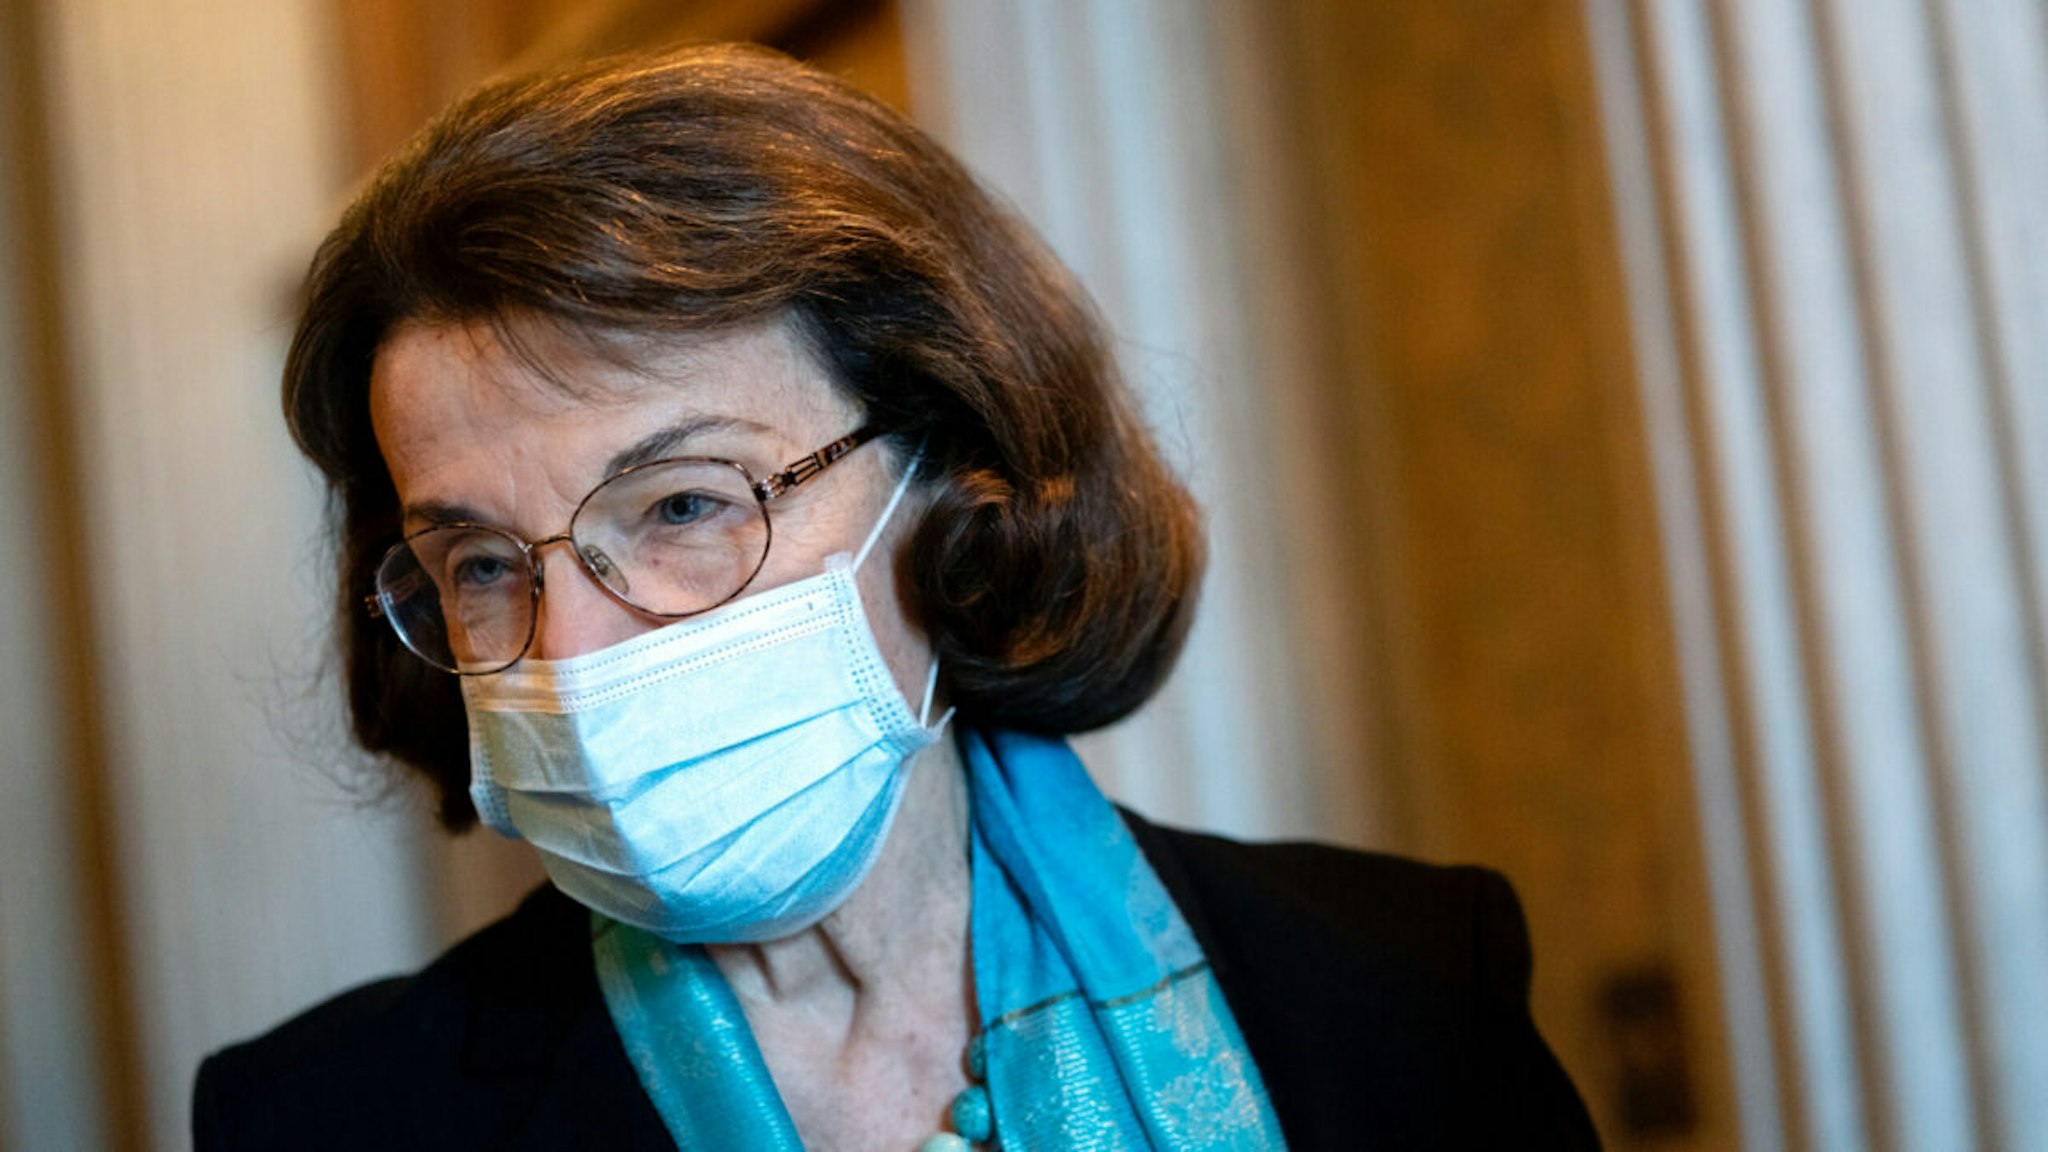 U.S. Sen. Dianne Feinstein (D-CA) wears a protective mask while departing the U.S. Capitol on December 11, 2020 in Washington, DC.